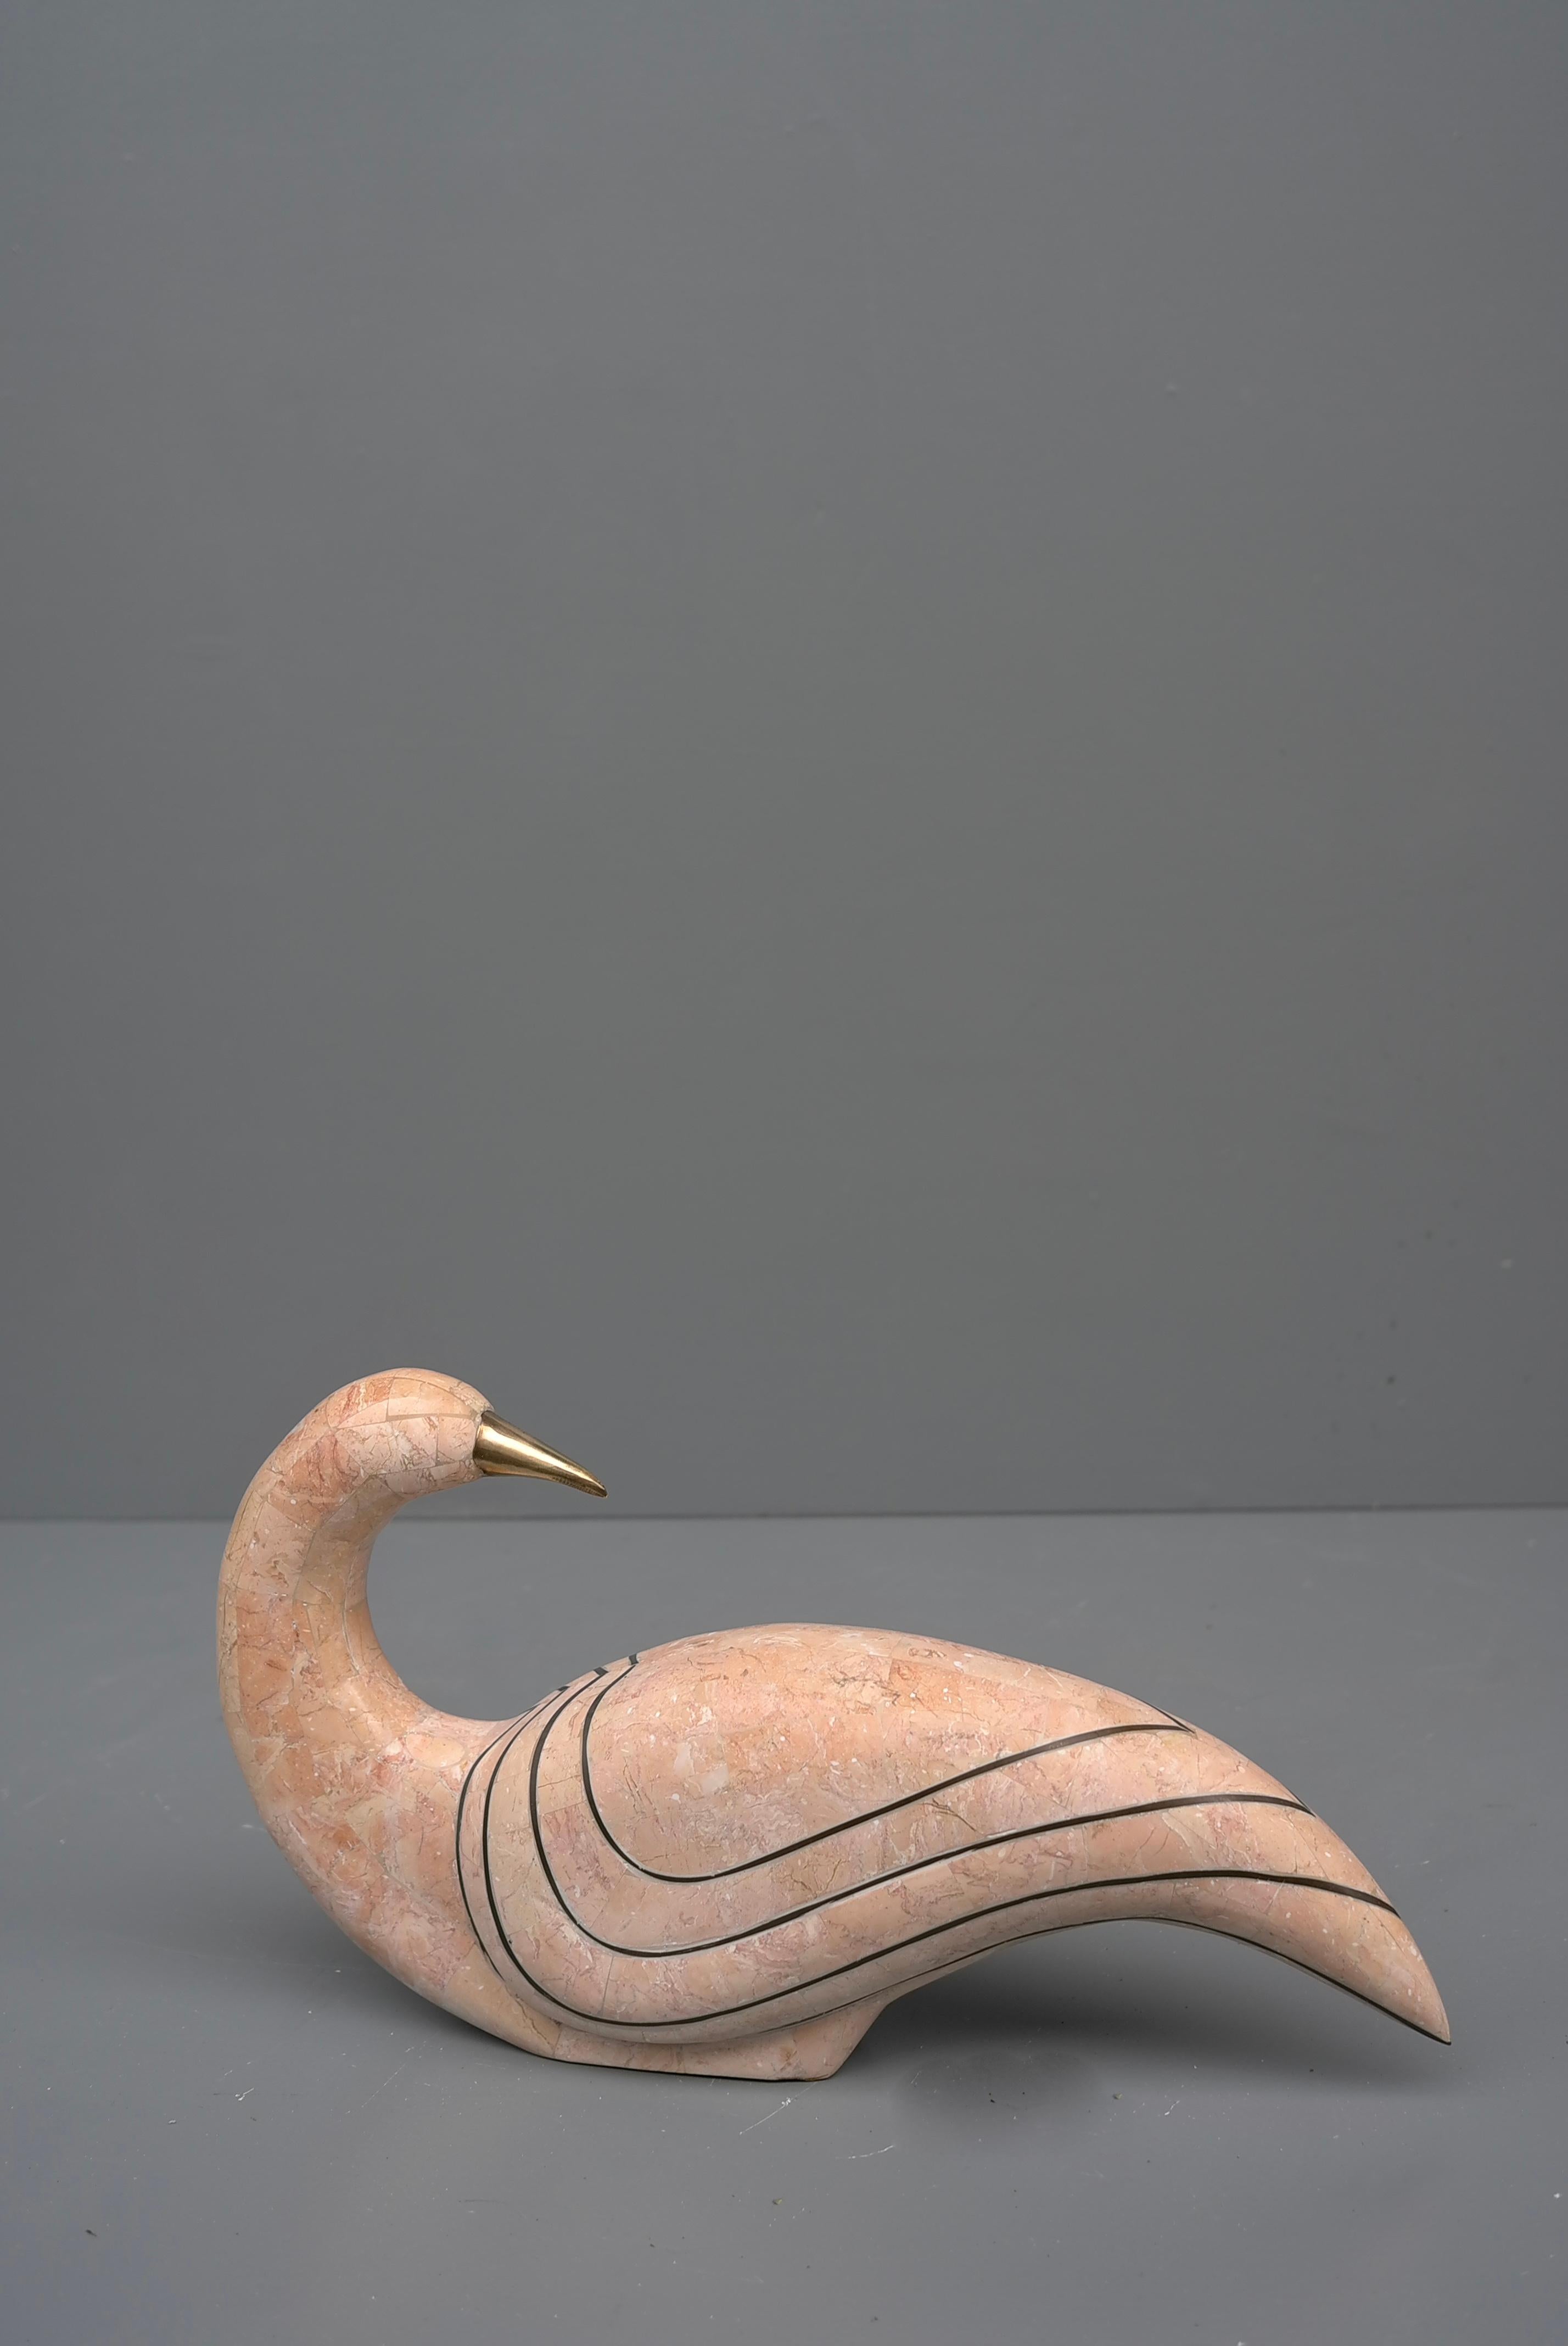 Mid-Century Modern Large Pink Tessellated Stone Abstract Bird Sculpture by Maitland Smith 1970's For Sale